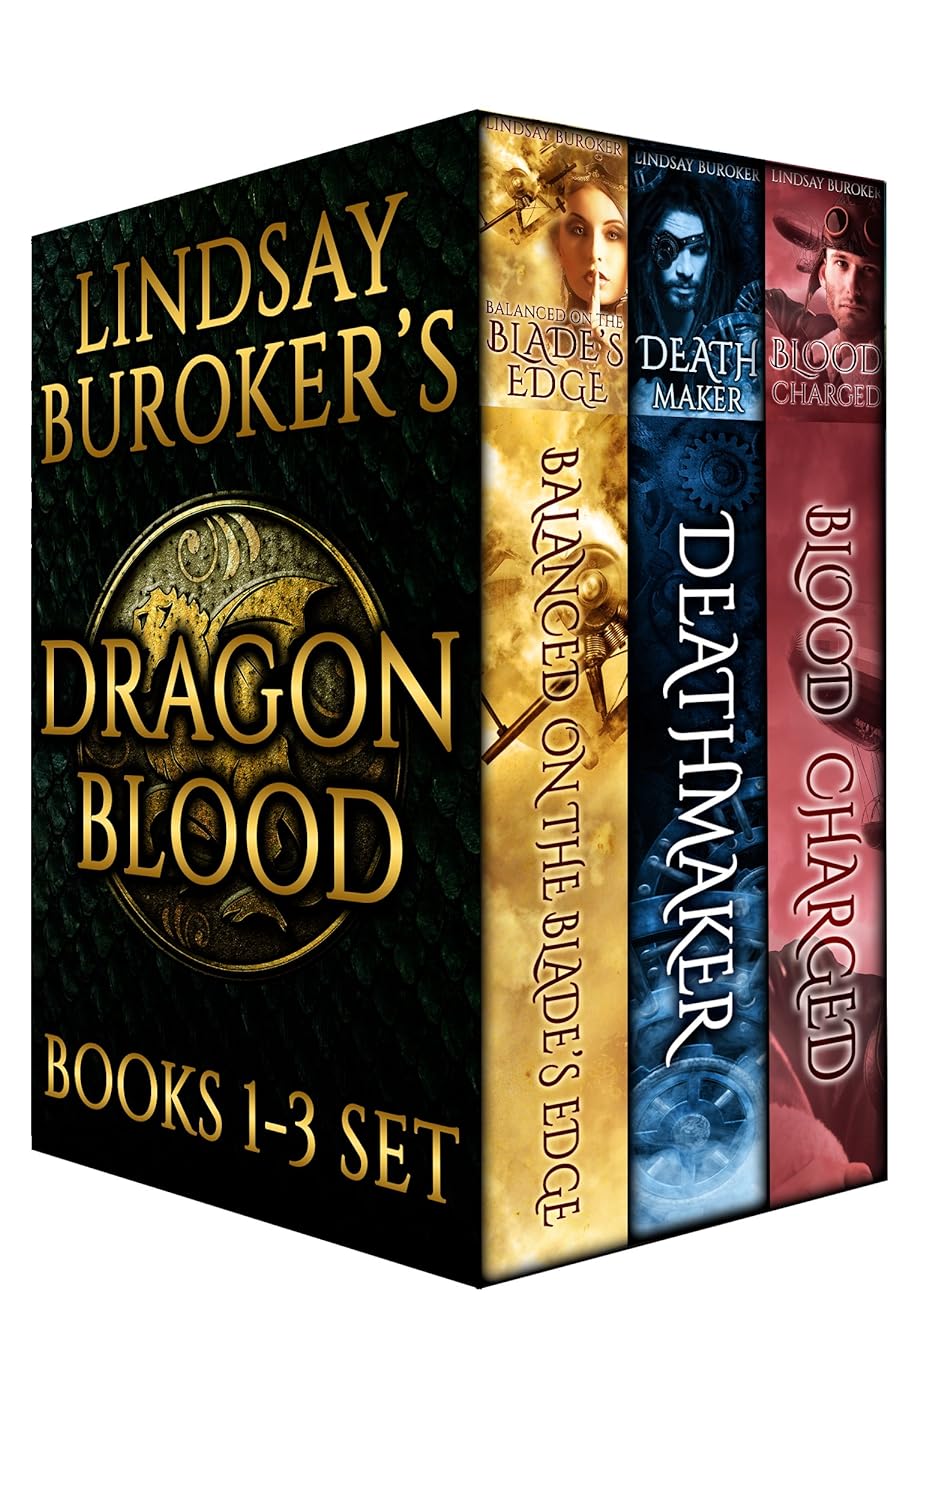 The Dragon Blood Collection, Books 1-3 is free on Amazon Kindle